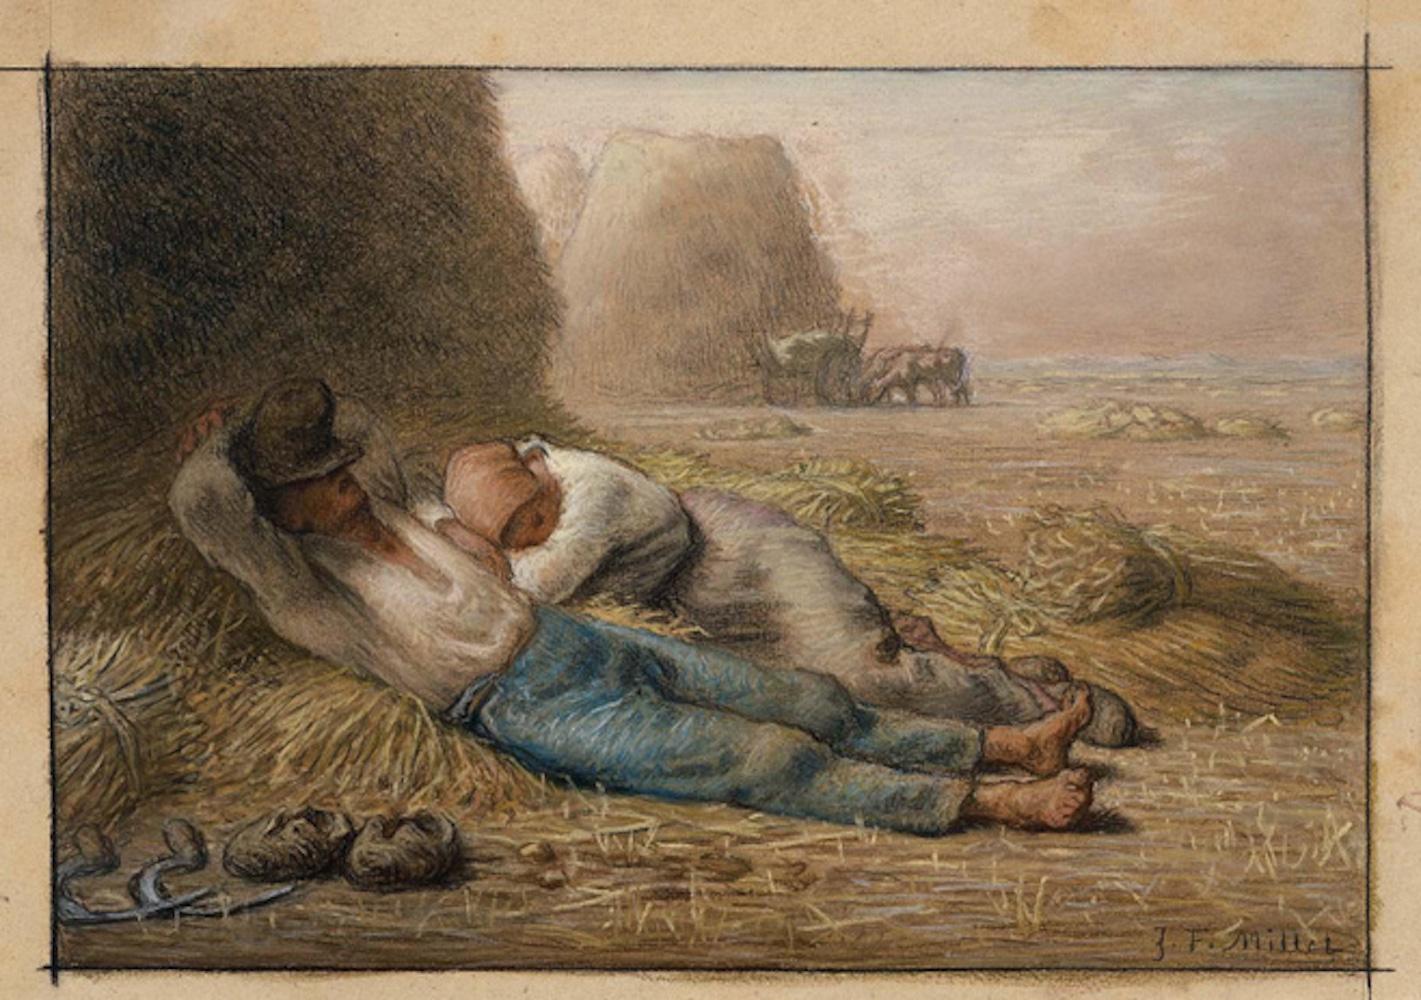 The study of the sleeping woman from 